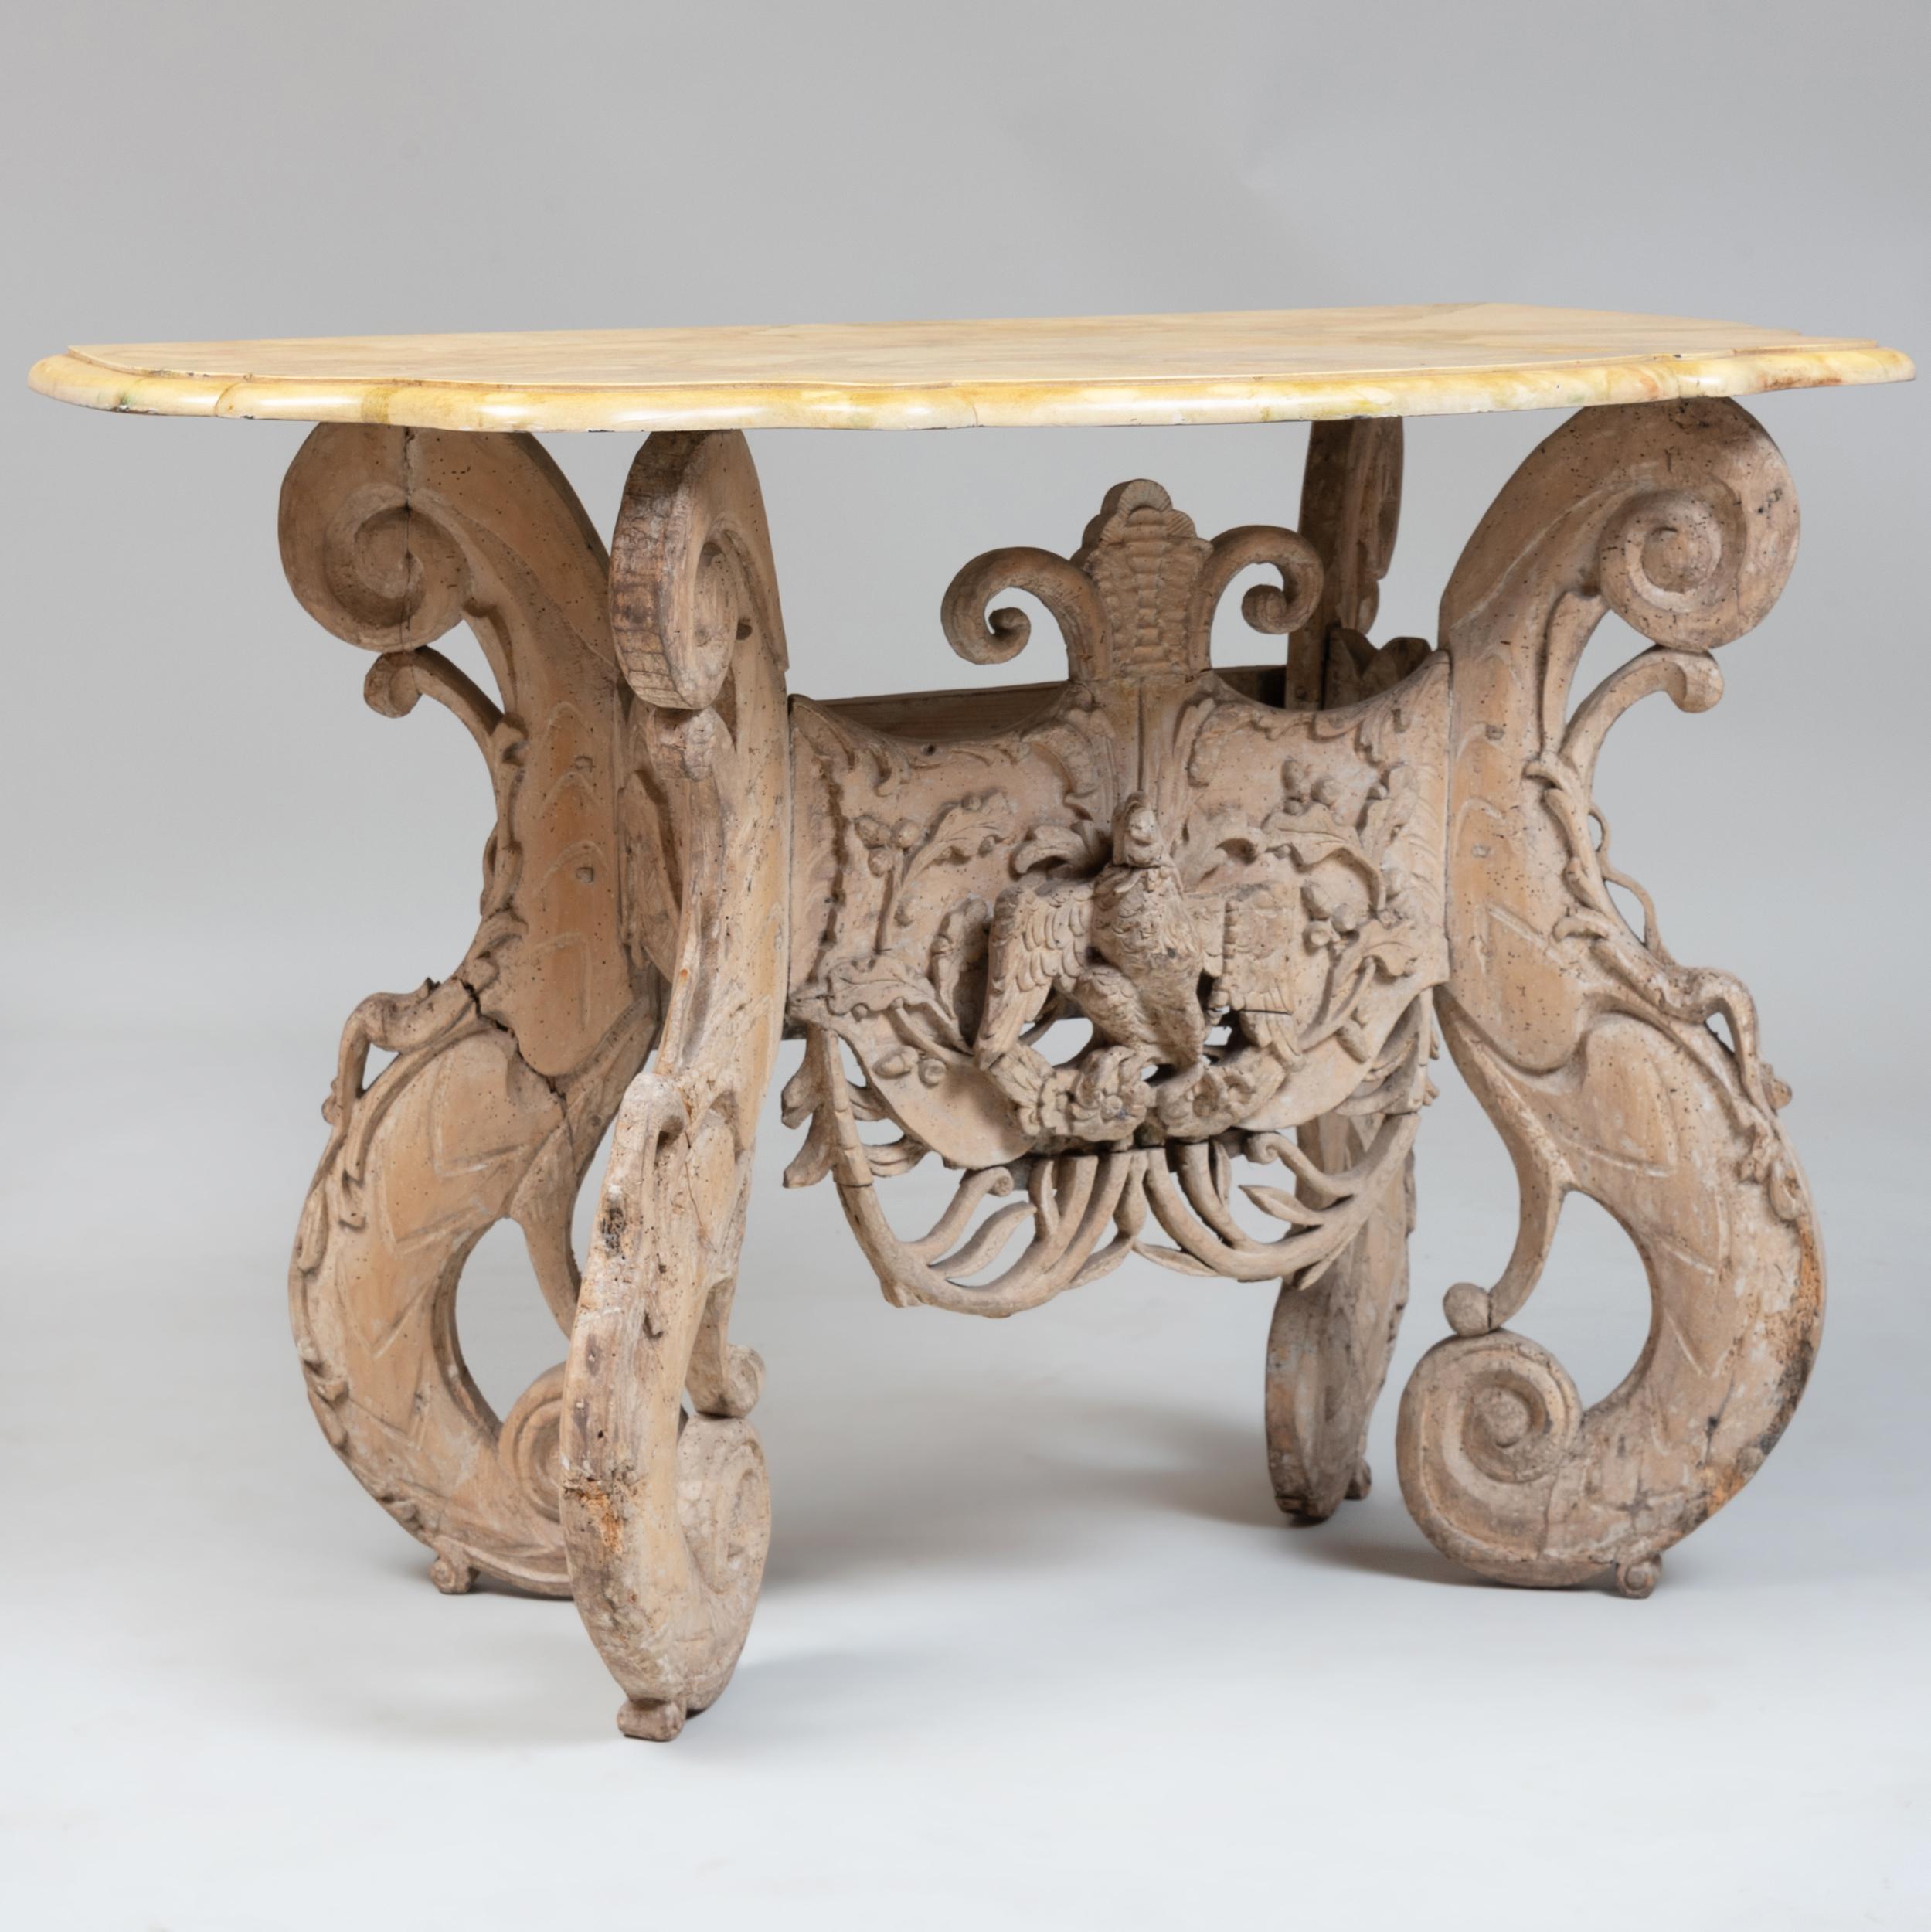 Period Charles II washed beechwood table of the mid-17th century. Rare. Four school legs, carved foliate and central eagle cartouche. Oak leaf and acorn central motif. Later shaped faux marble top and included a chic faux red porphyry top

Ex